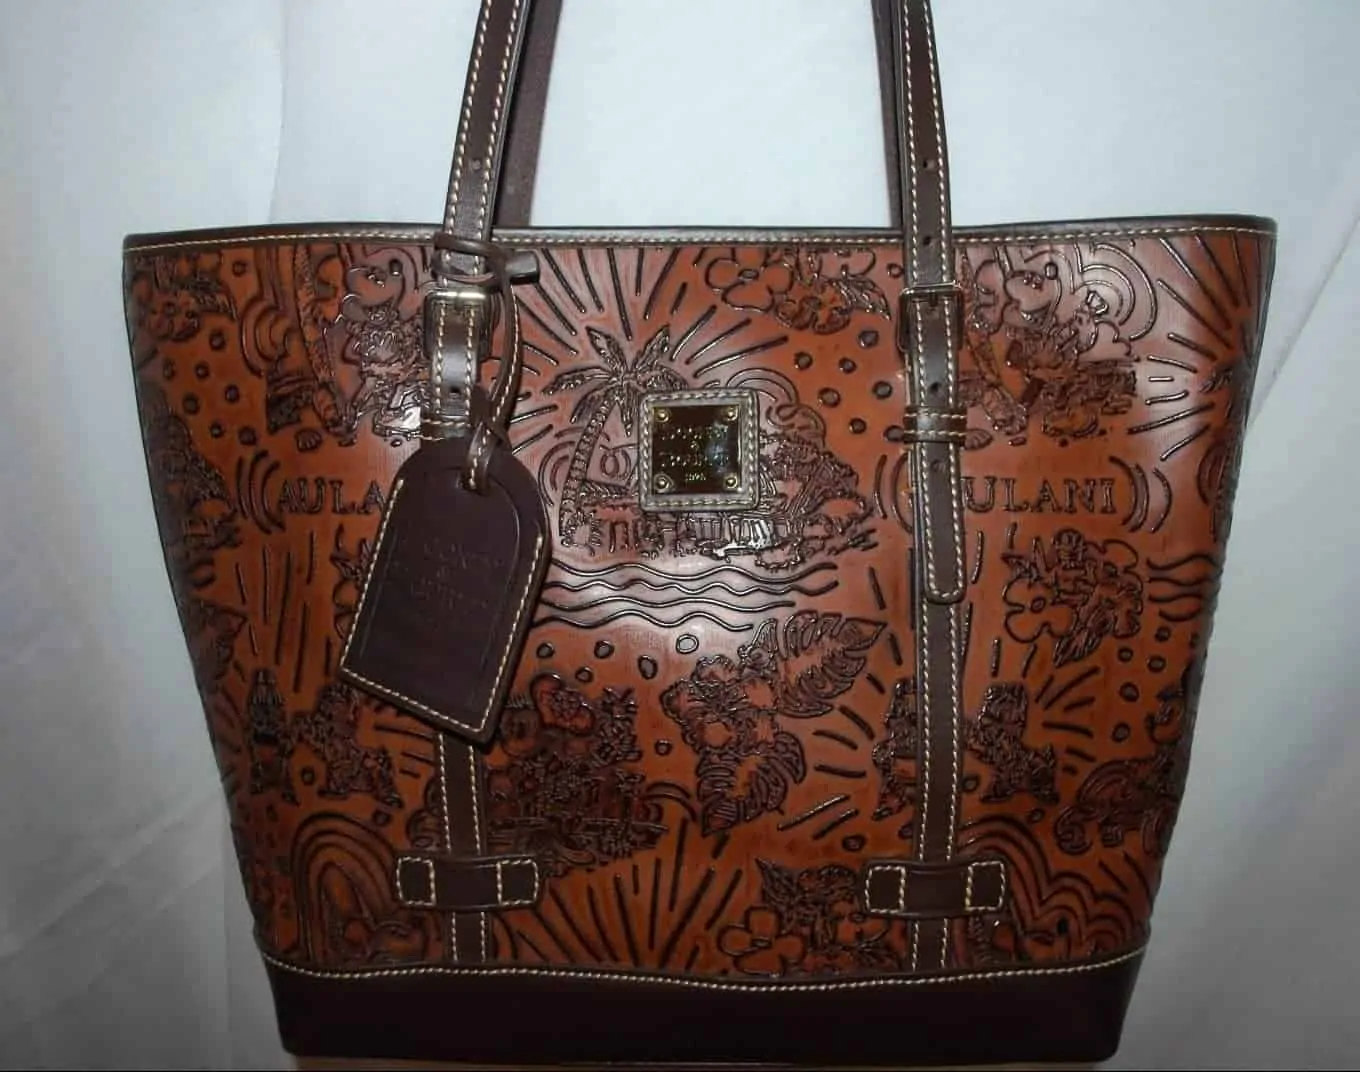 Aulani Brown Leather Tote